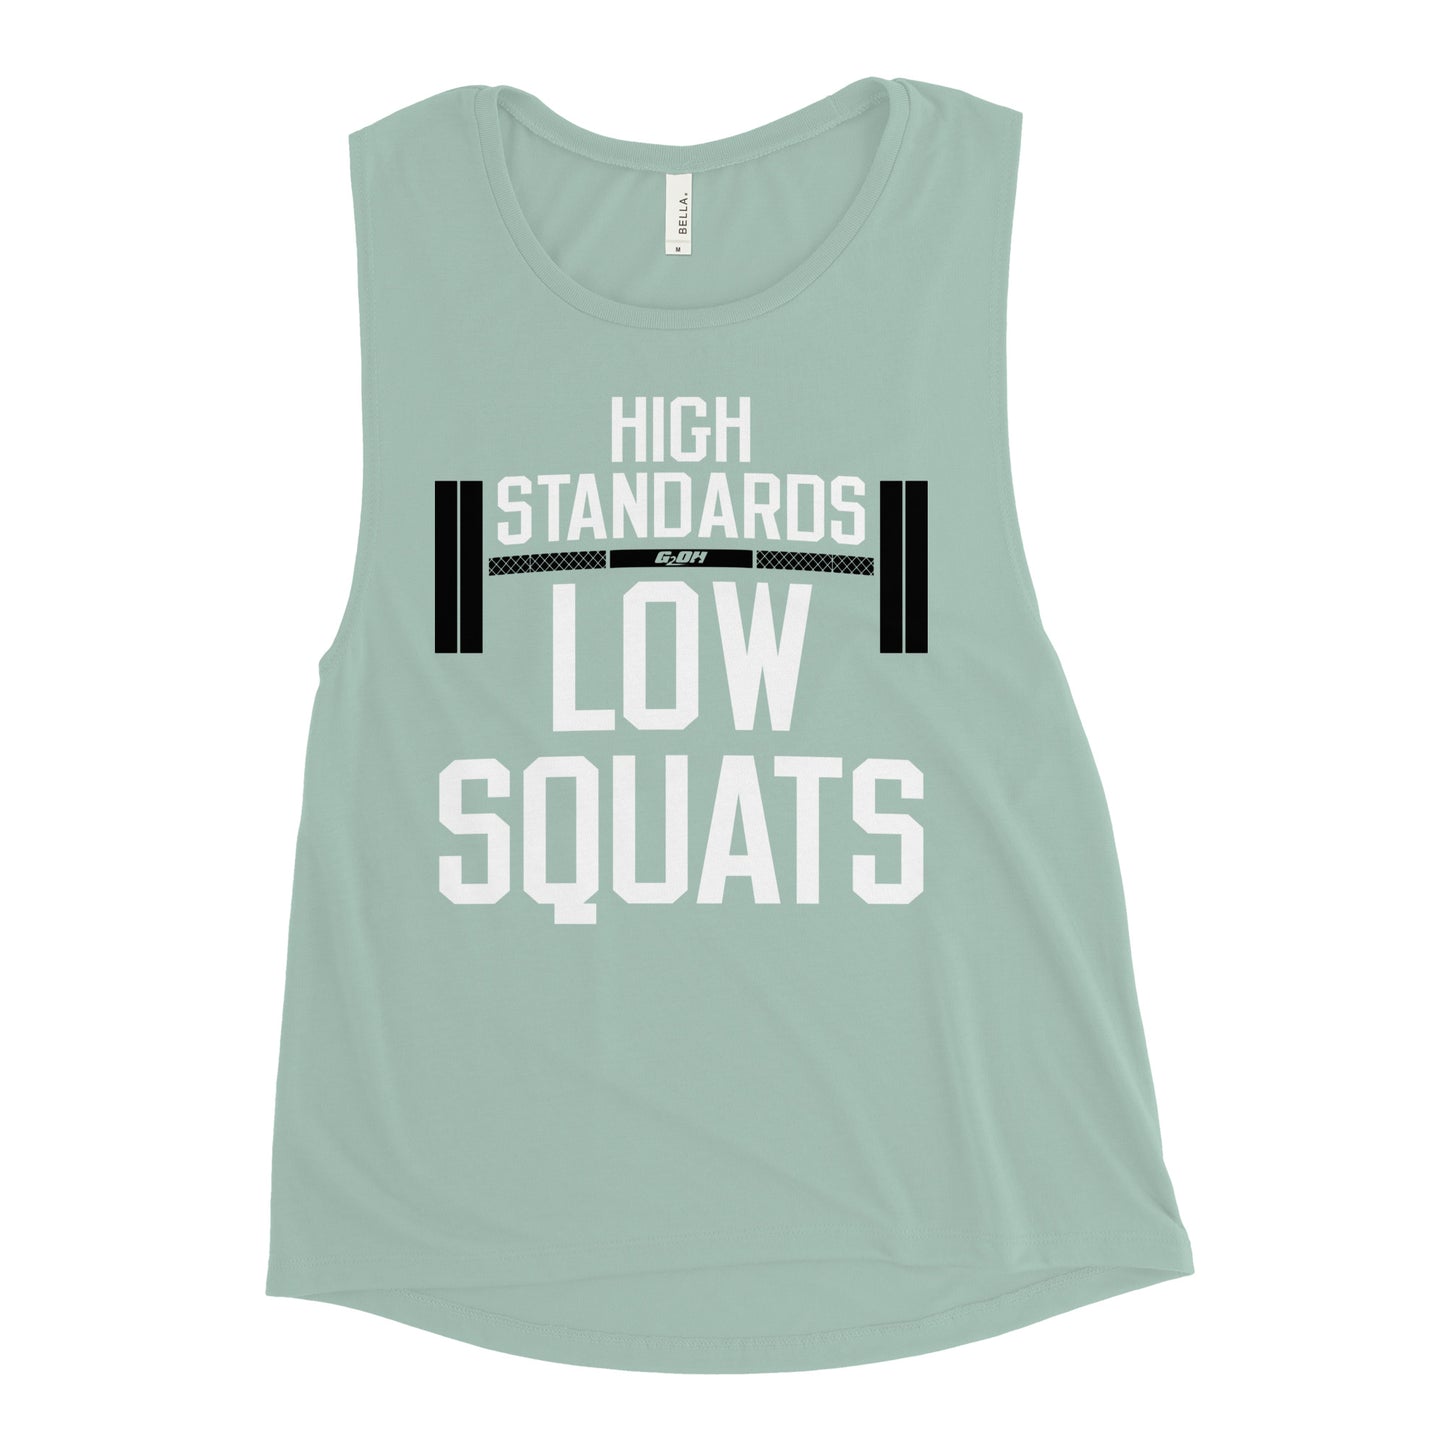 High Standards Low Squats Women's Muscle Tank